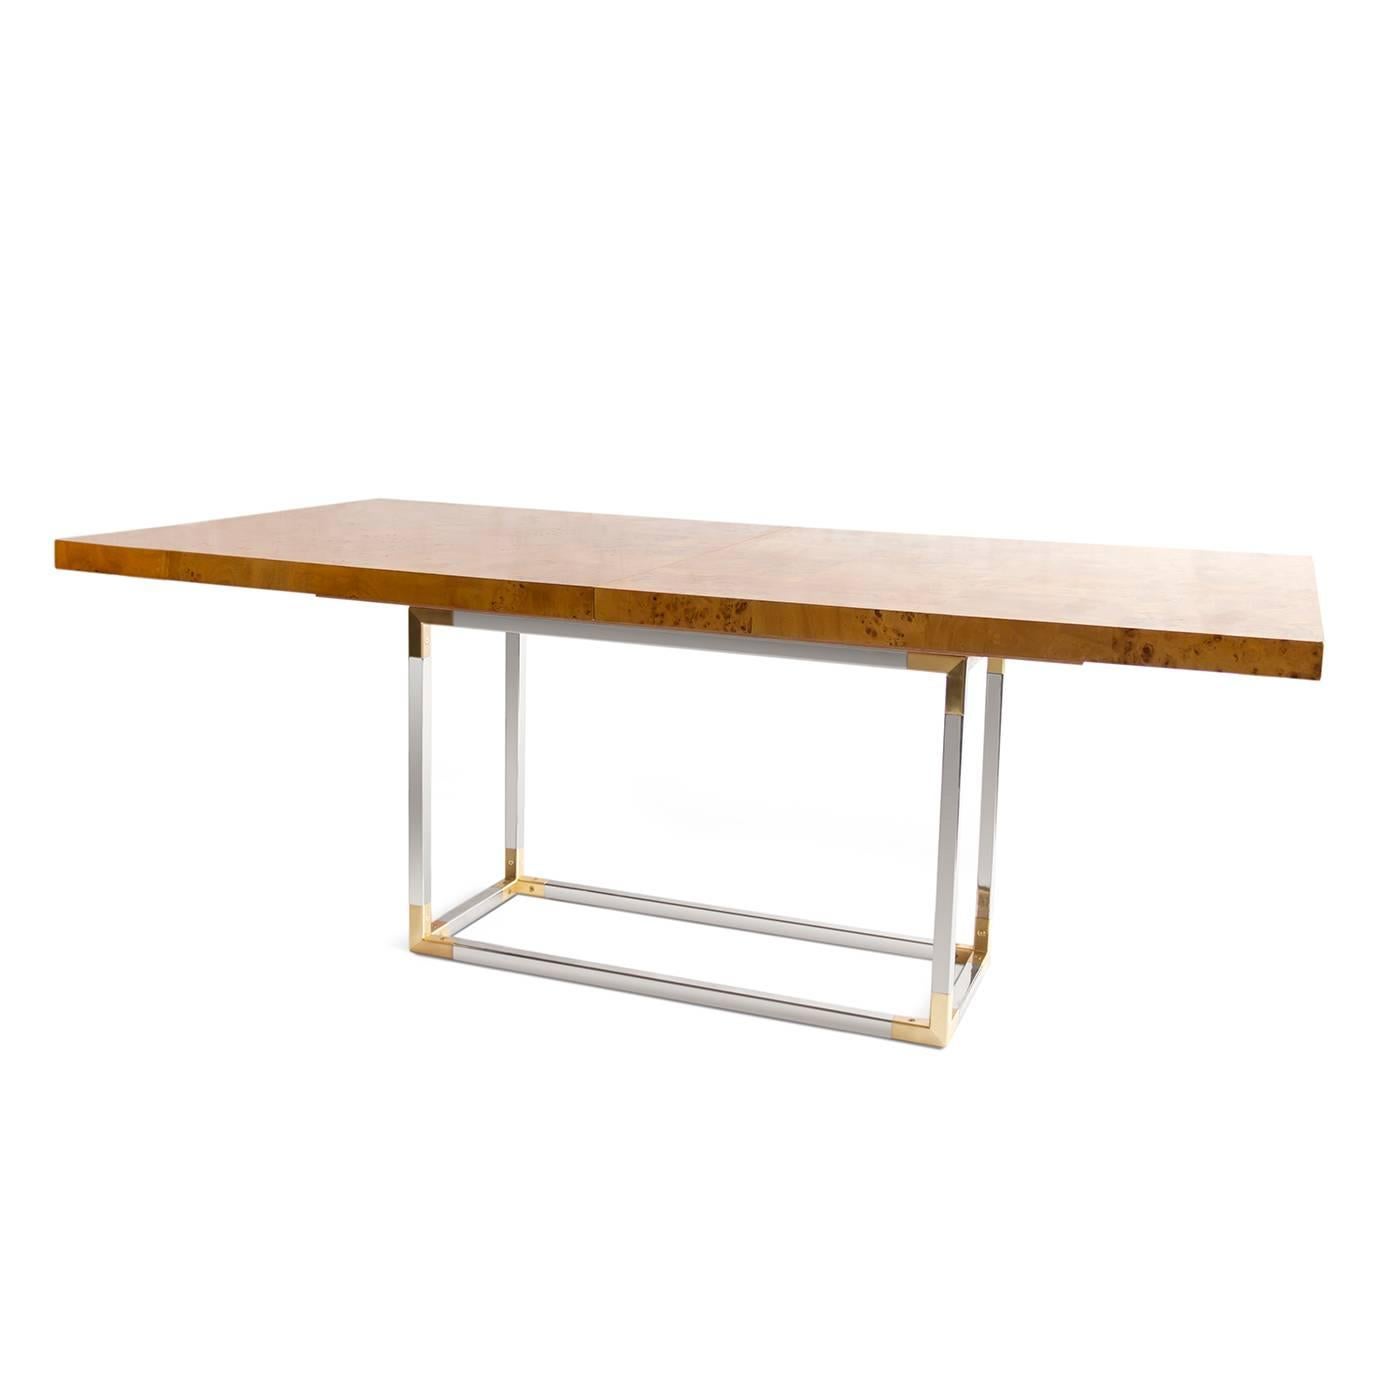 Timelessly chic. Pieced, burled mappa top with a wonderfully durable satin matte finish on a polished nickel base with matte brass Campaign corners. A removable 20 inch leaf extends the table to comfortably seat up to 10, at a max length of 100